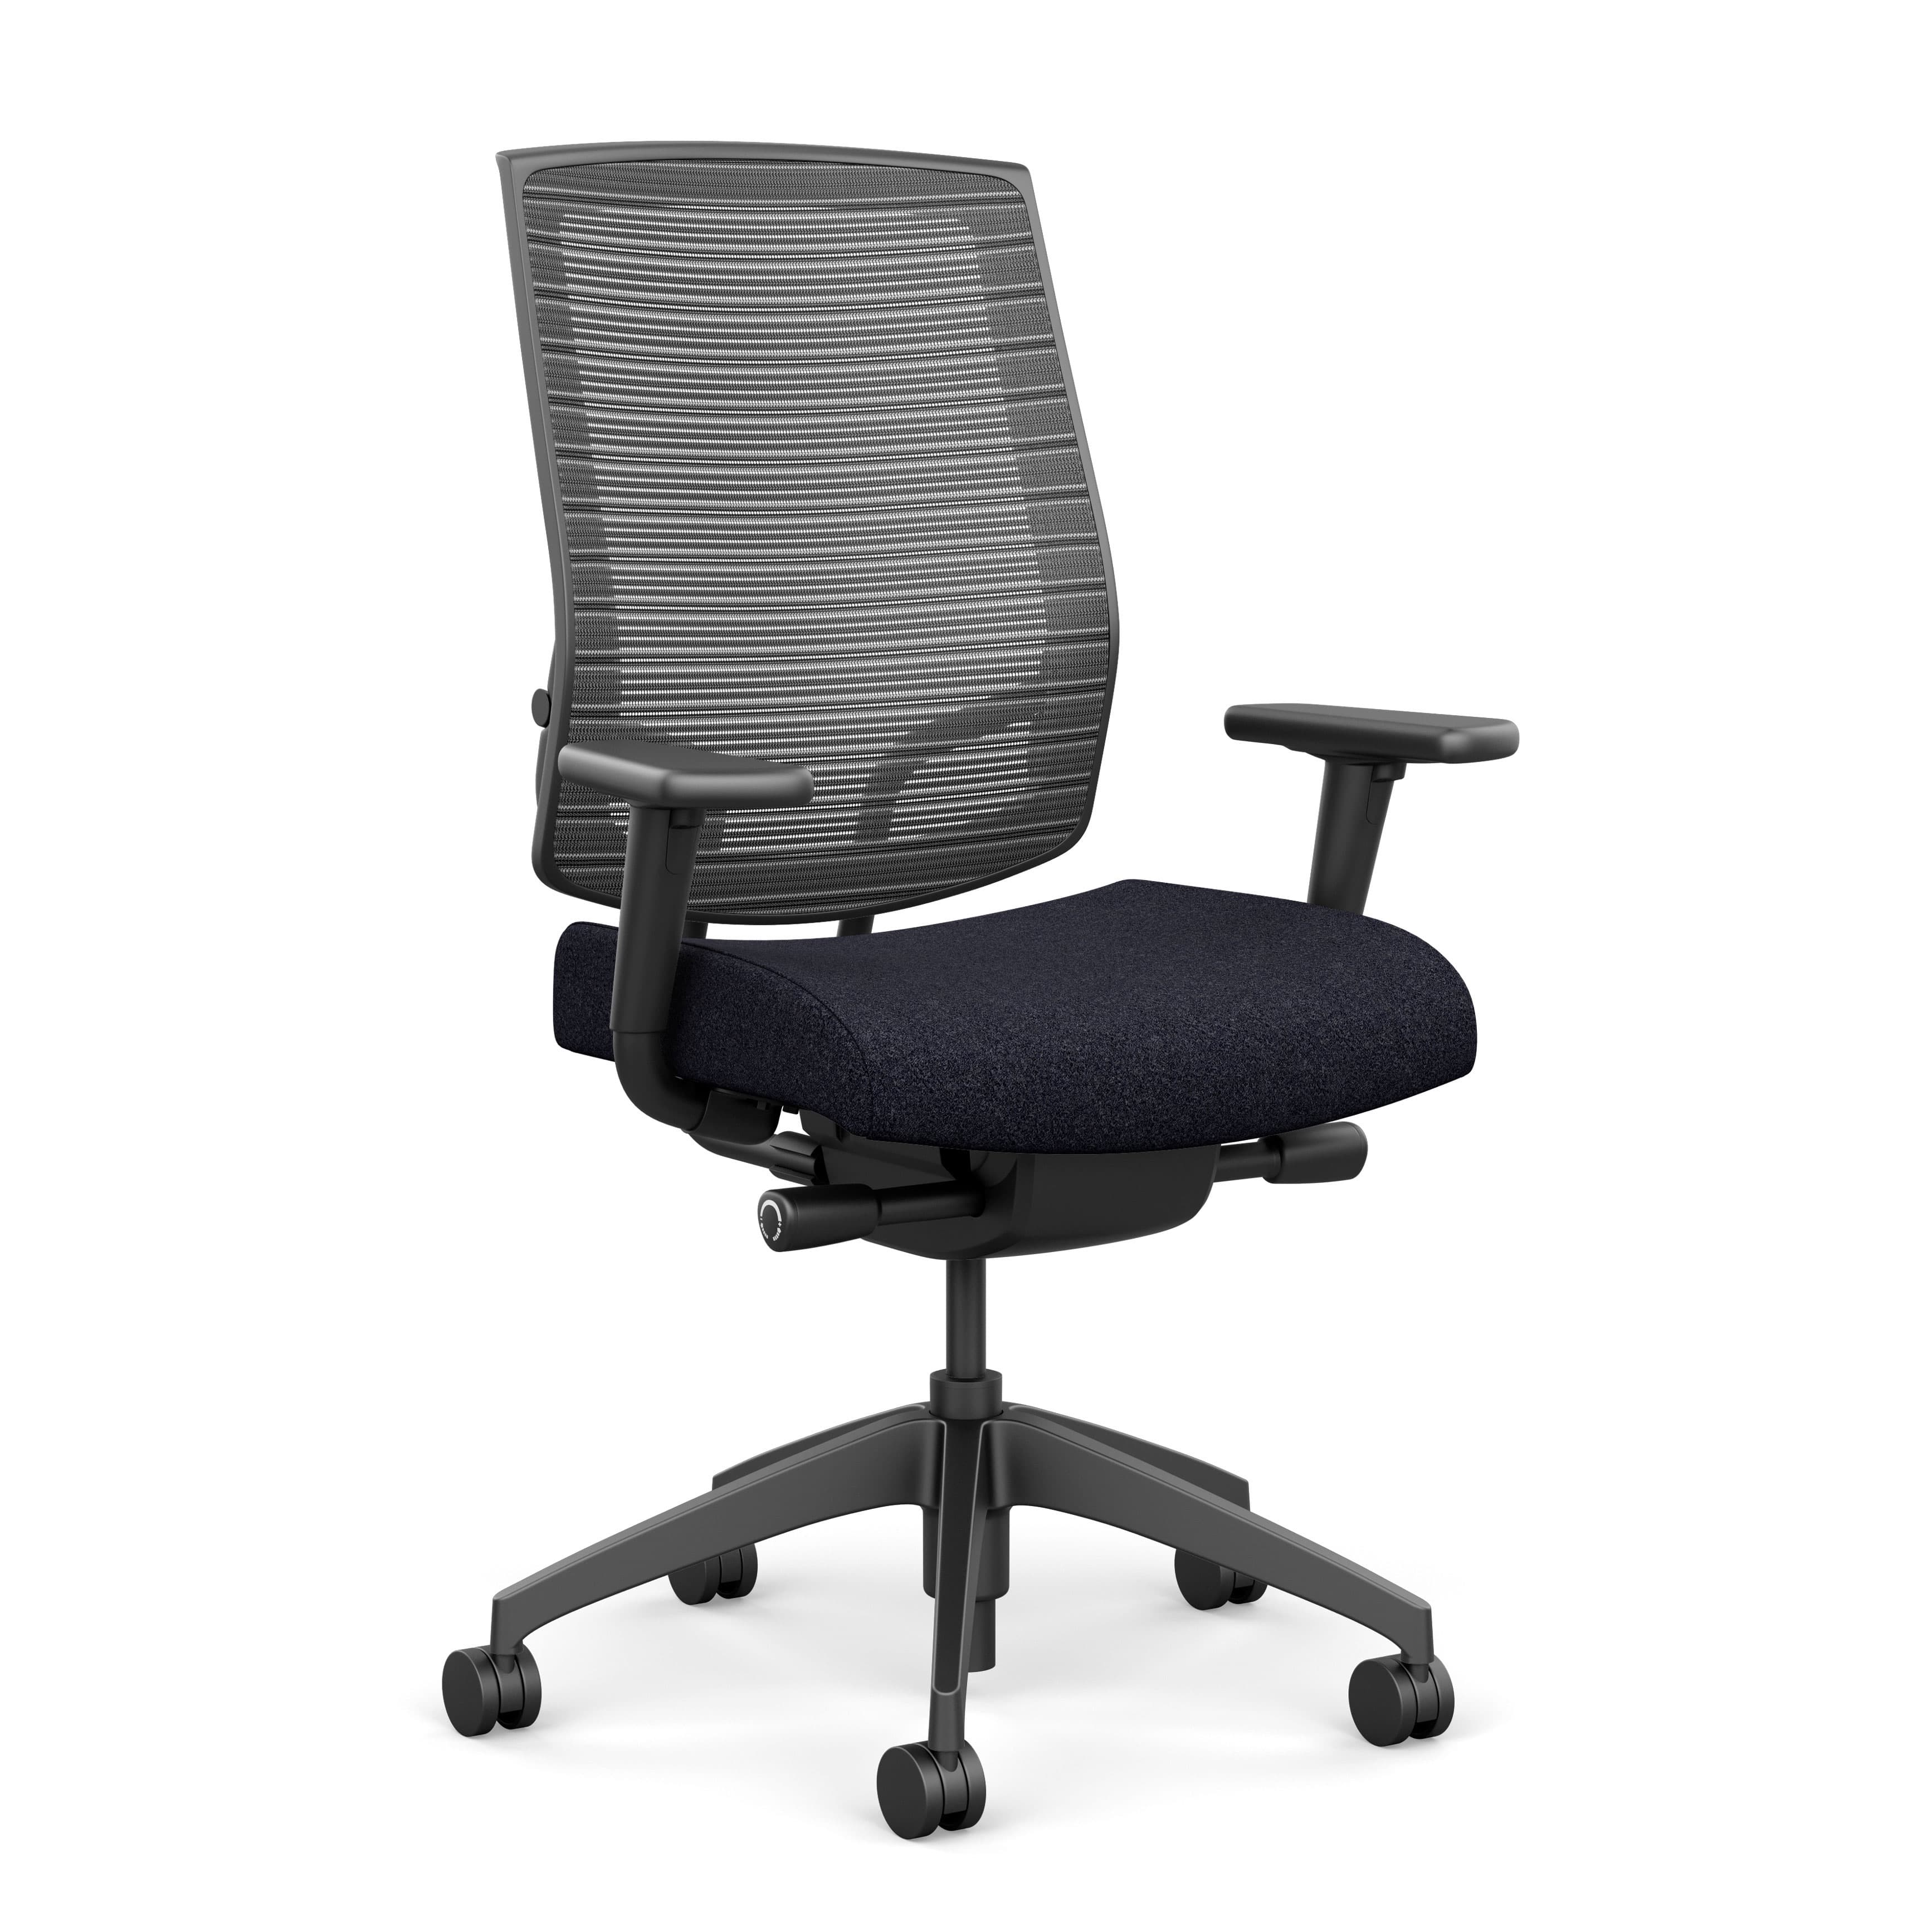  Focus Highback Mesh Task Chair with Adjustable Arms